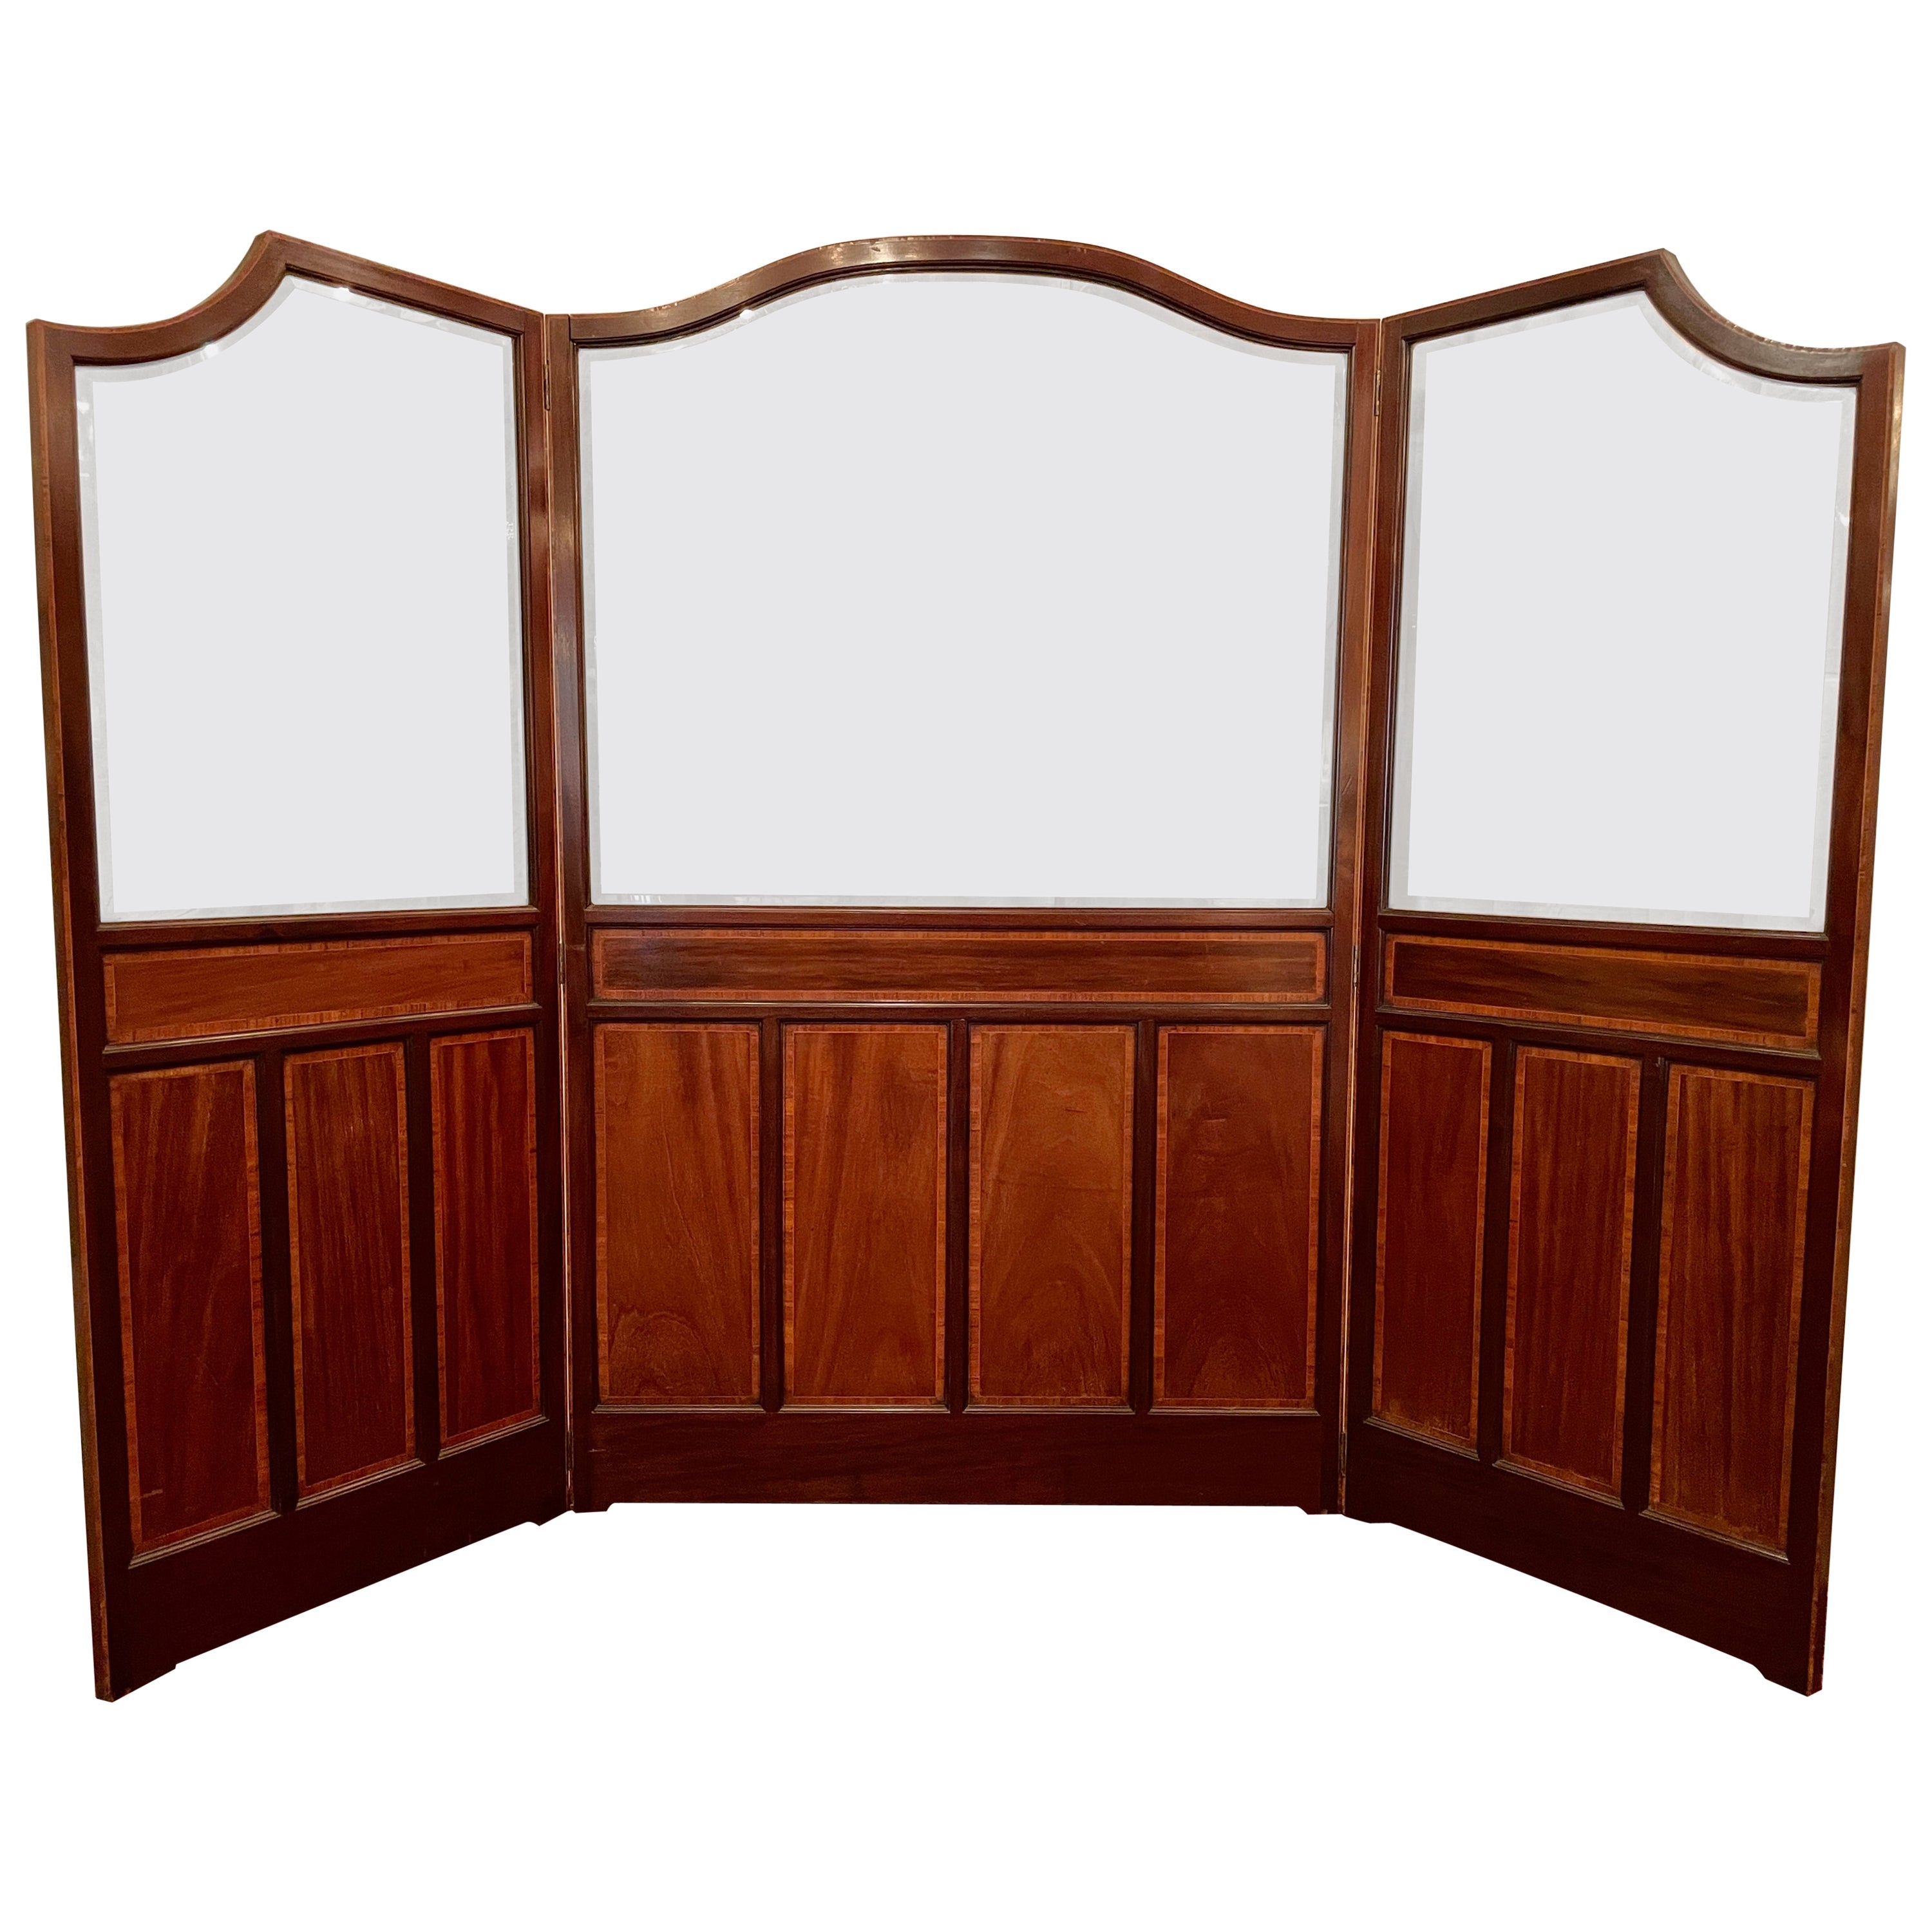 Antique English Inlaid Mahogany & Beveled Glass 3 Panel Floor Screen, Circa 1900 For Sale